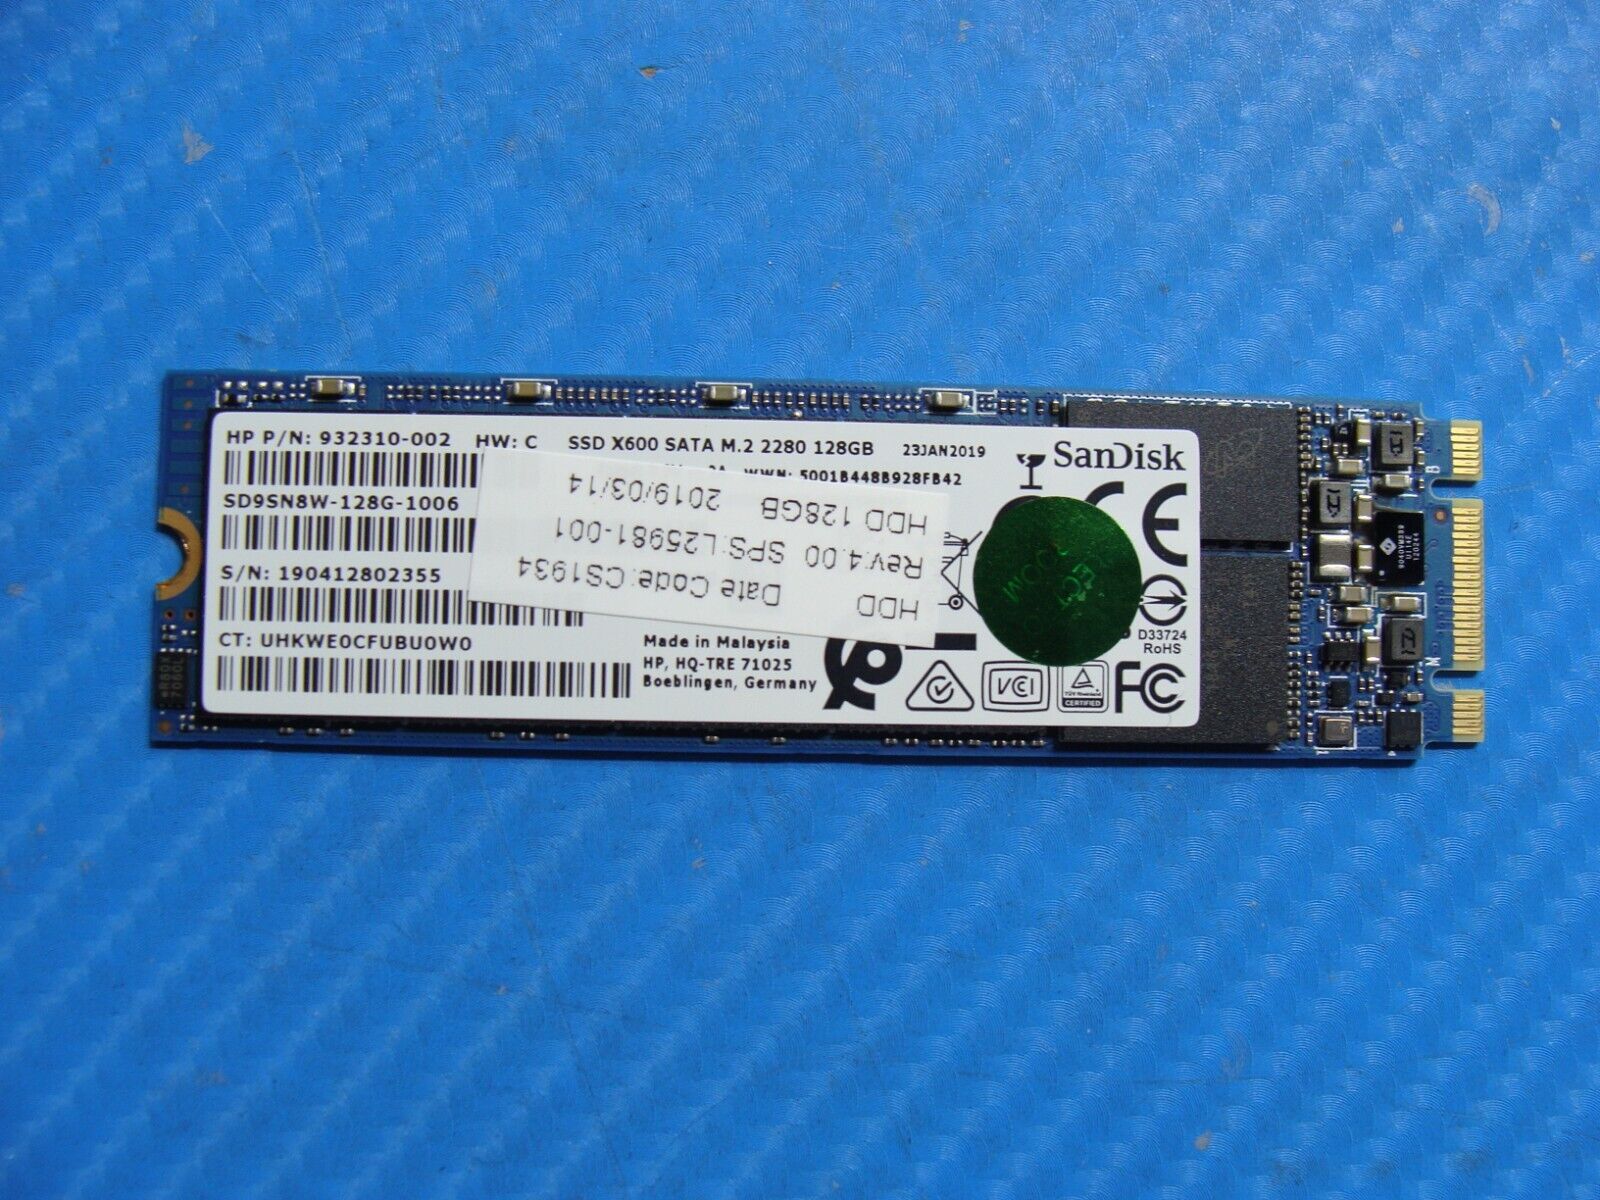 HP 14-cf0006dx SanDisk 128GB SATA M.2 SSD Solid State Drive SD9SN8W-128G-1006